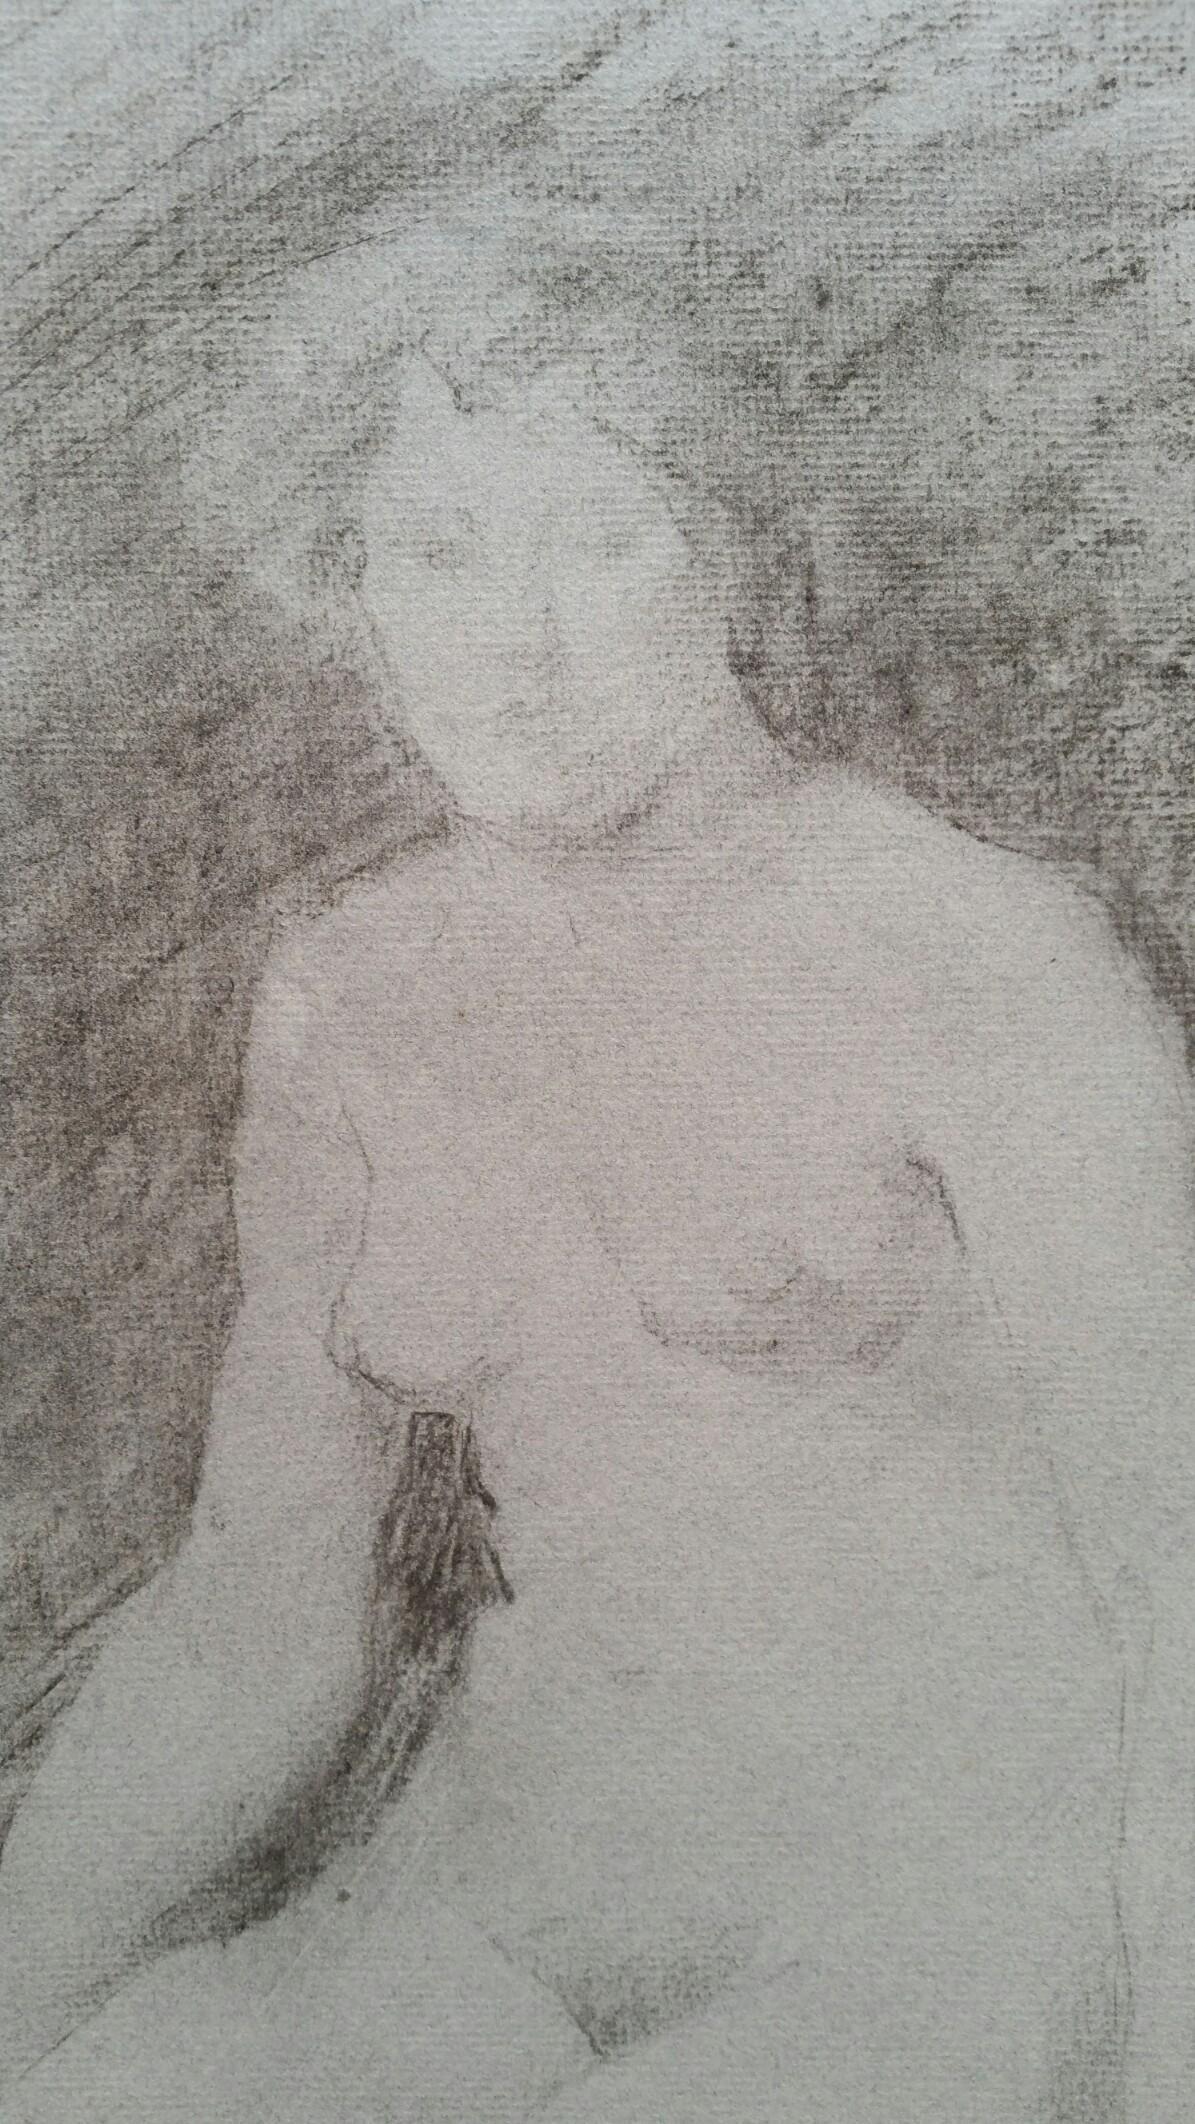 English Graphite Portrait Sketch of Female Nude, Seated In Good Condition For Sale In Cirencester, GB